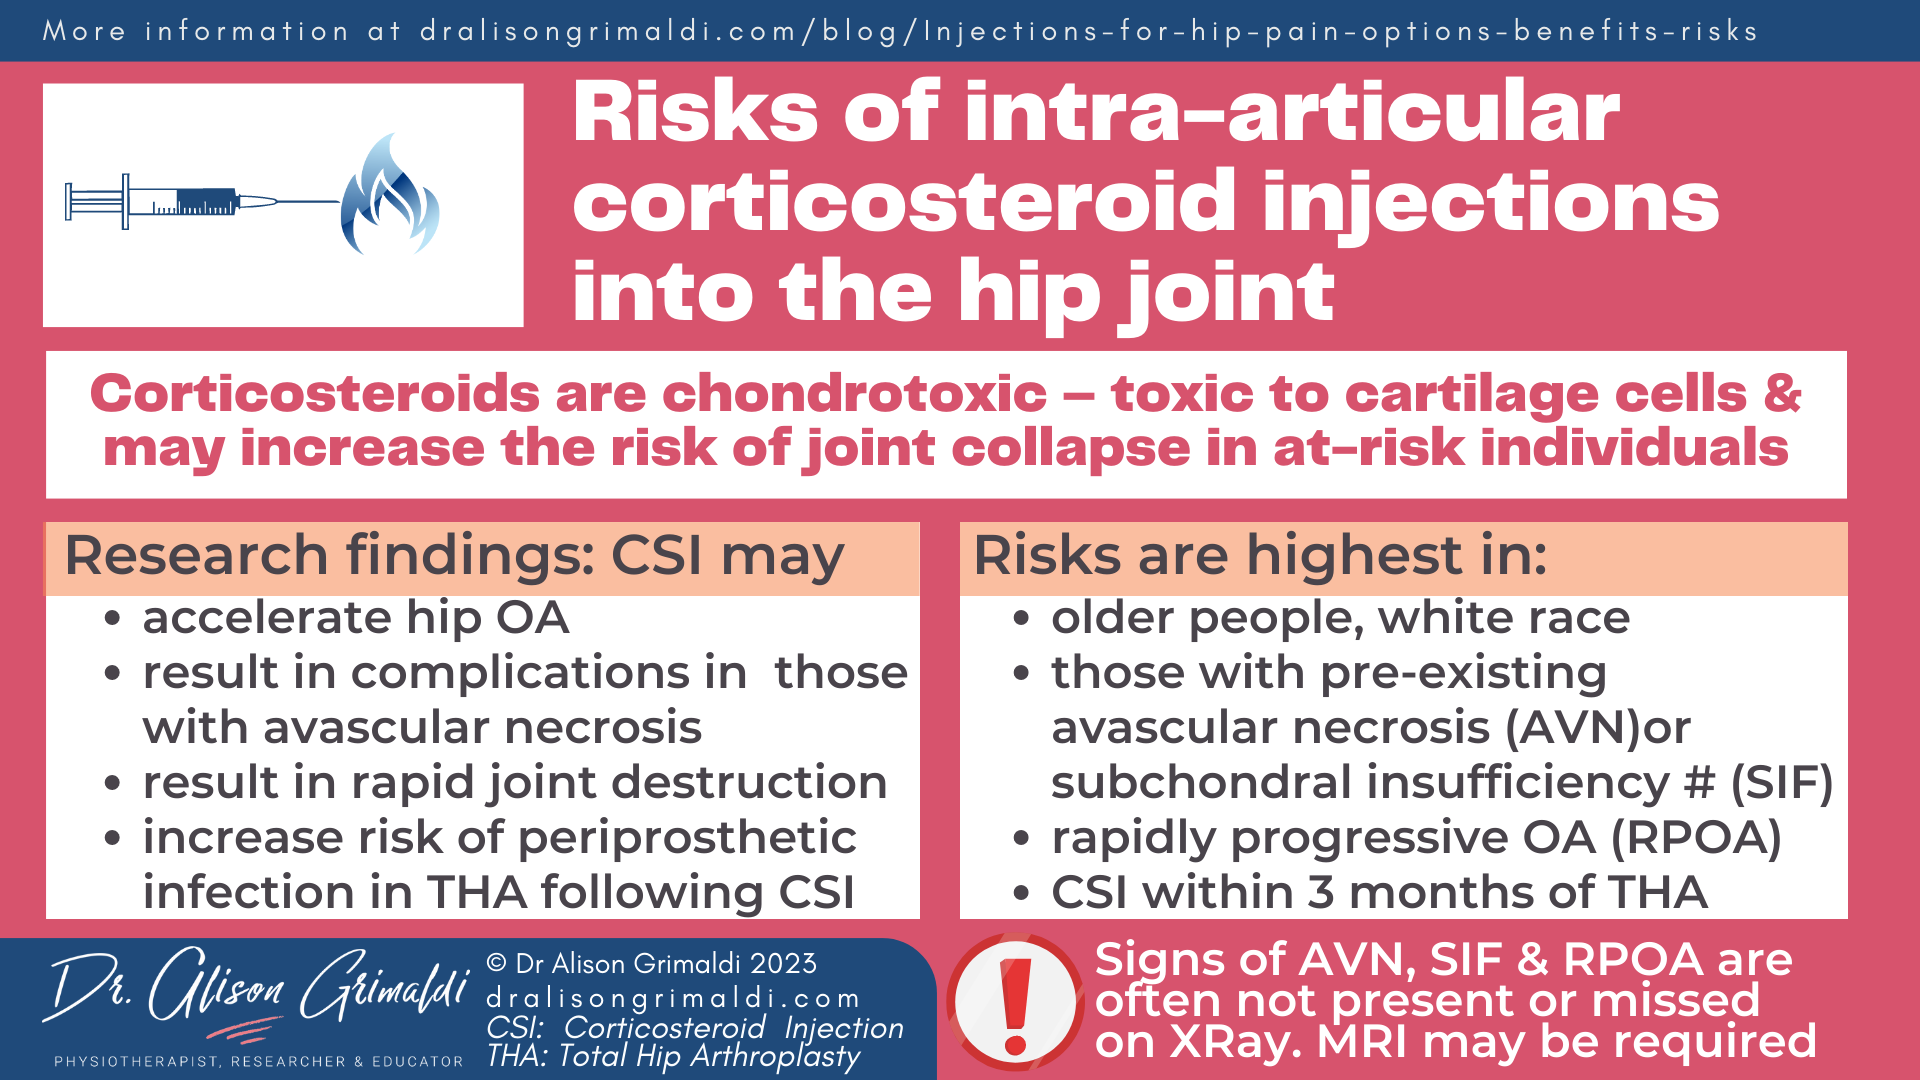 Risks of intra-articular corticosteroid injections into the hip joint